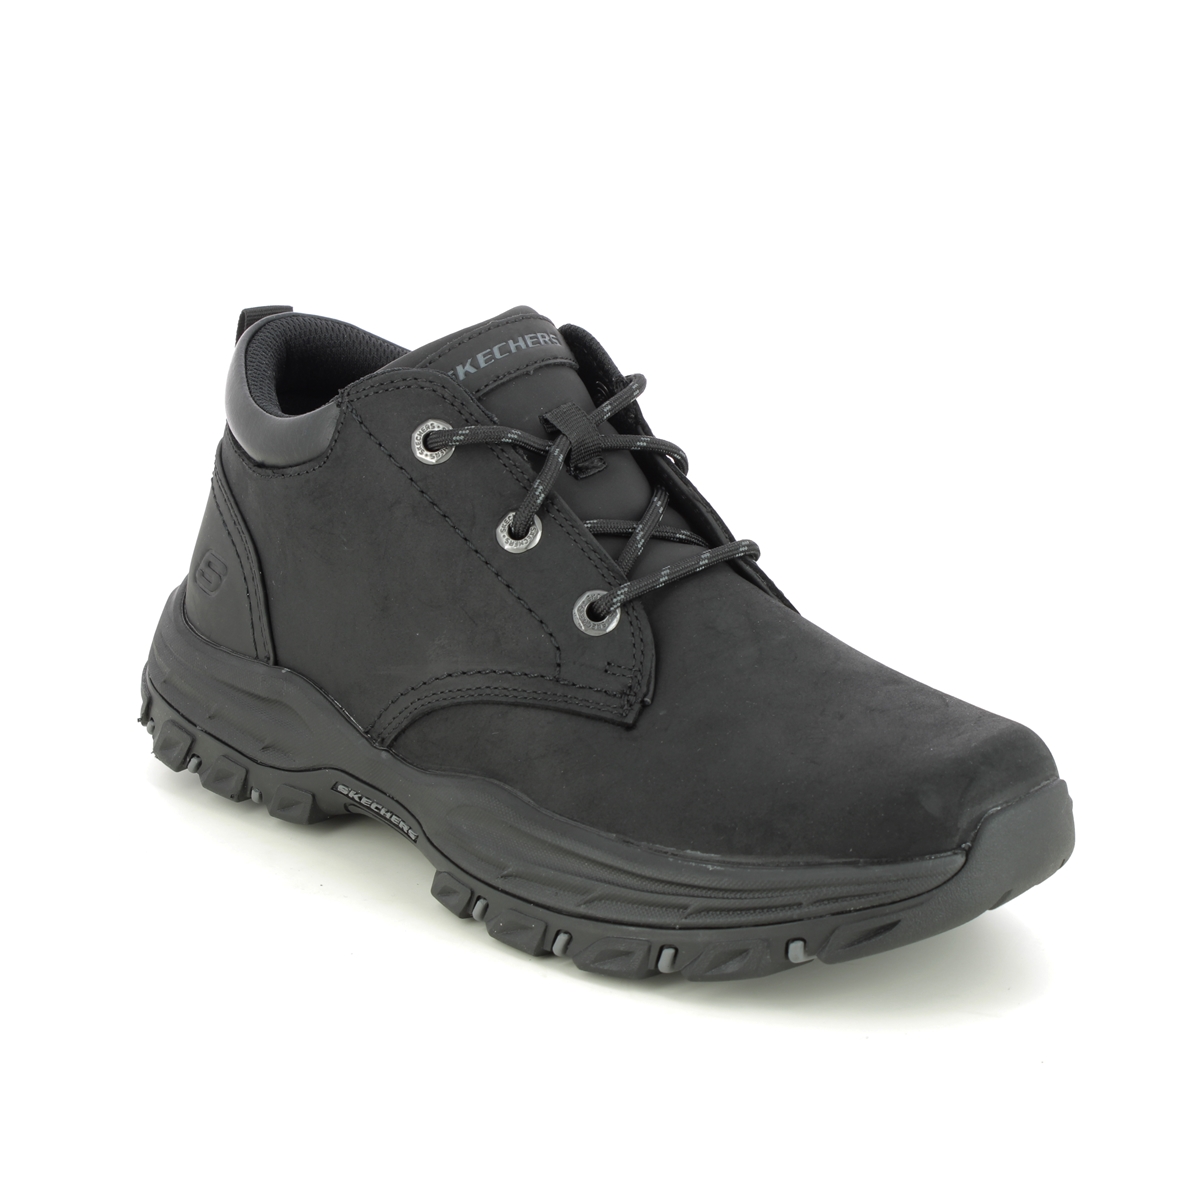 Skechers Knowlson Ramhur BLK Black Mens Chukka Boots 204921 in a Plain Leather in Size 12